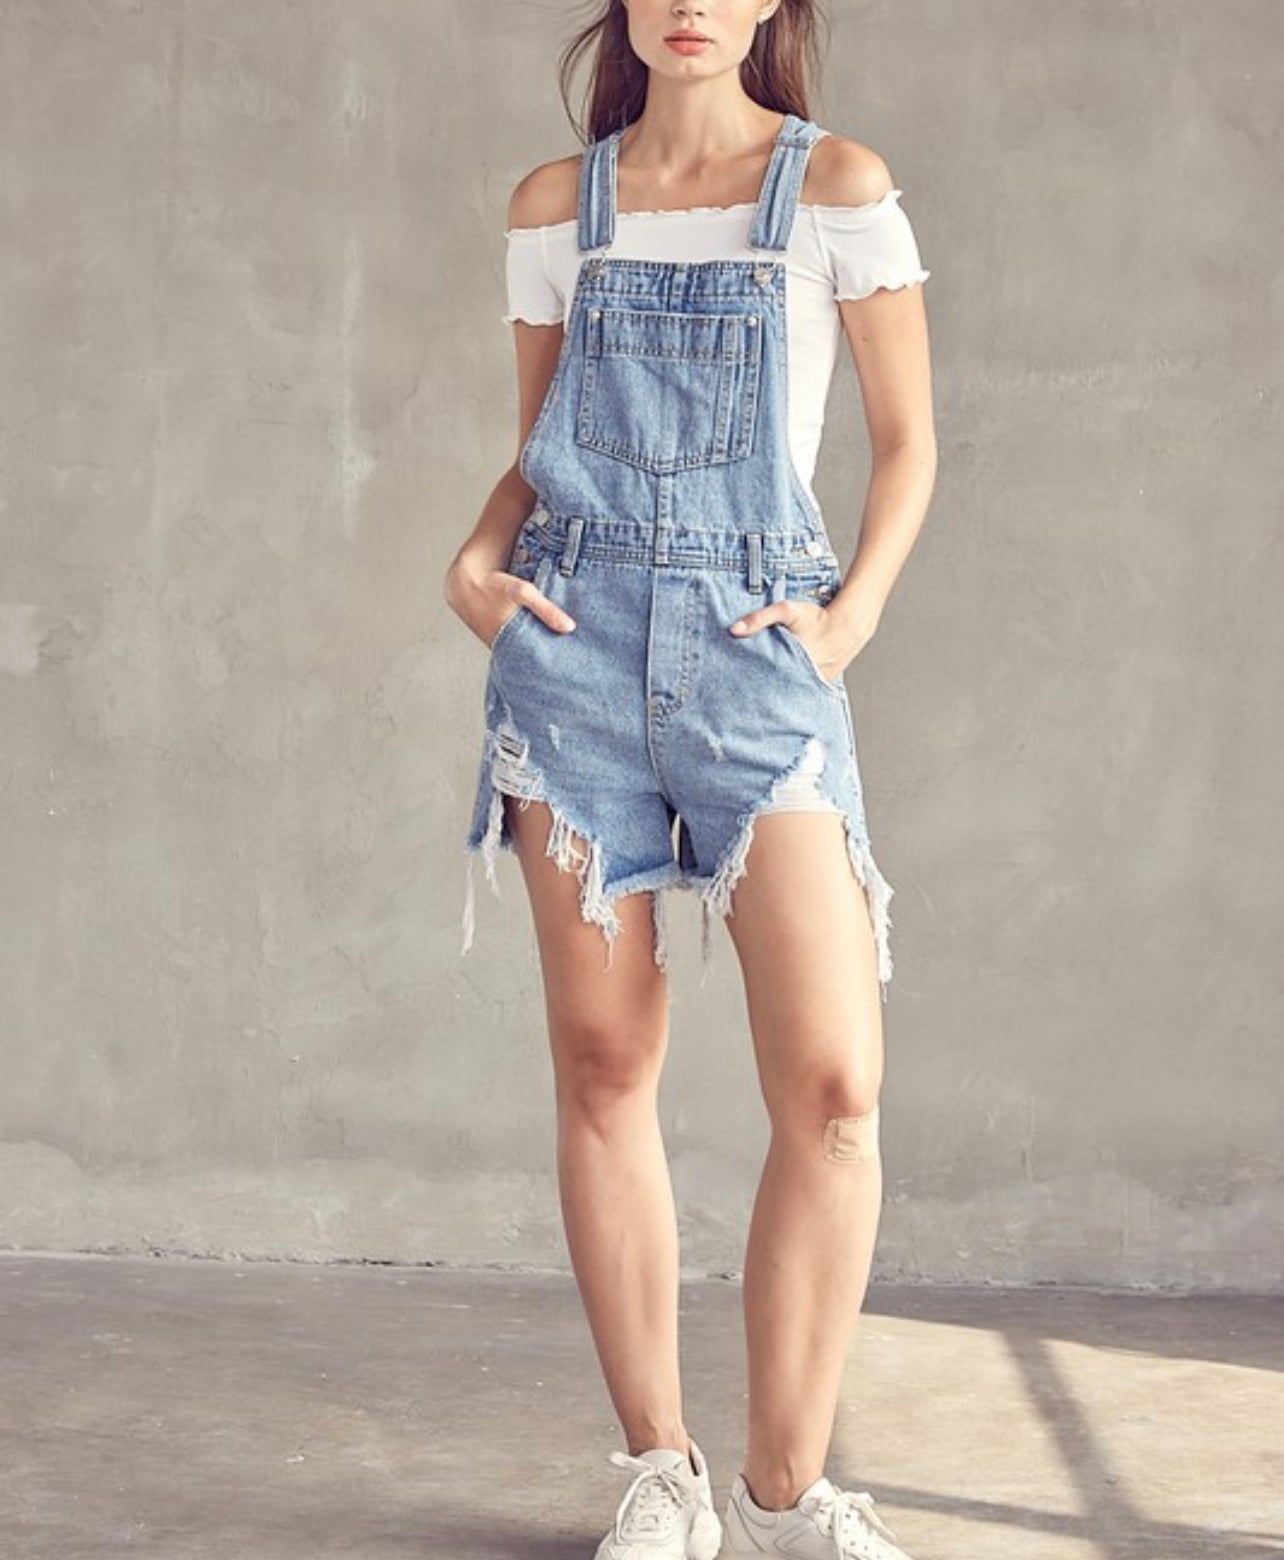 Distressed Denim Overall Shorts | Shop What's New at Papaya Clothing | Overall  shorts, Denim overalls shorts, Overalls